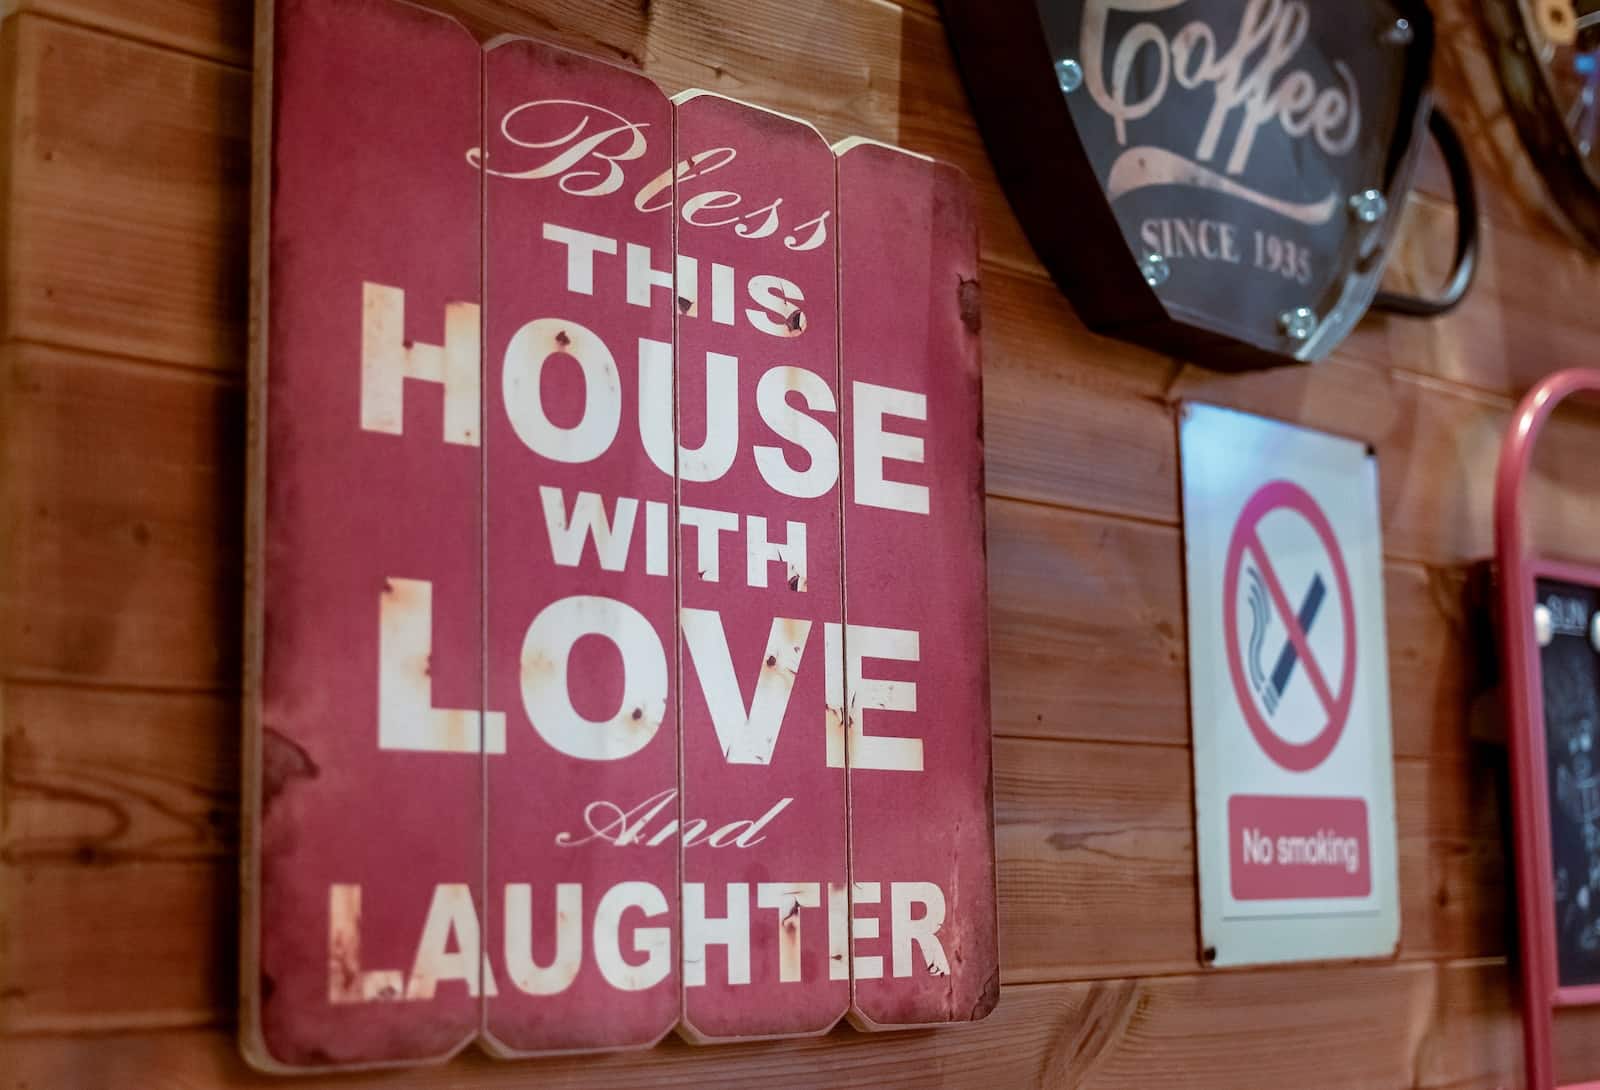 bless this house with love and laughter board